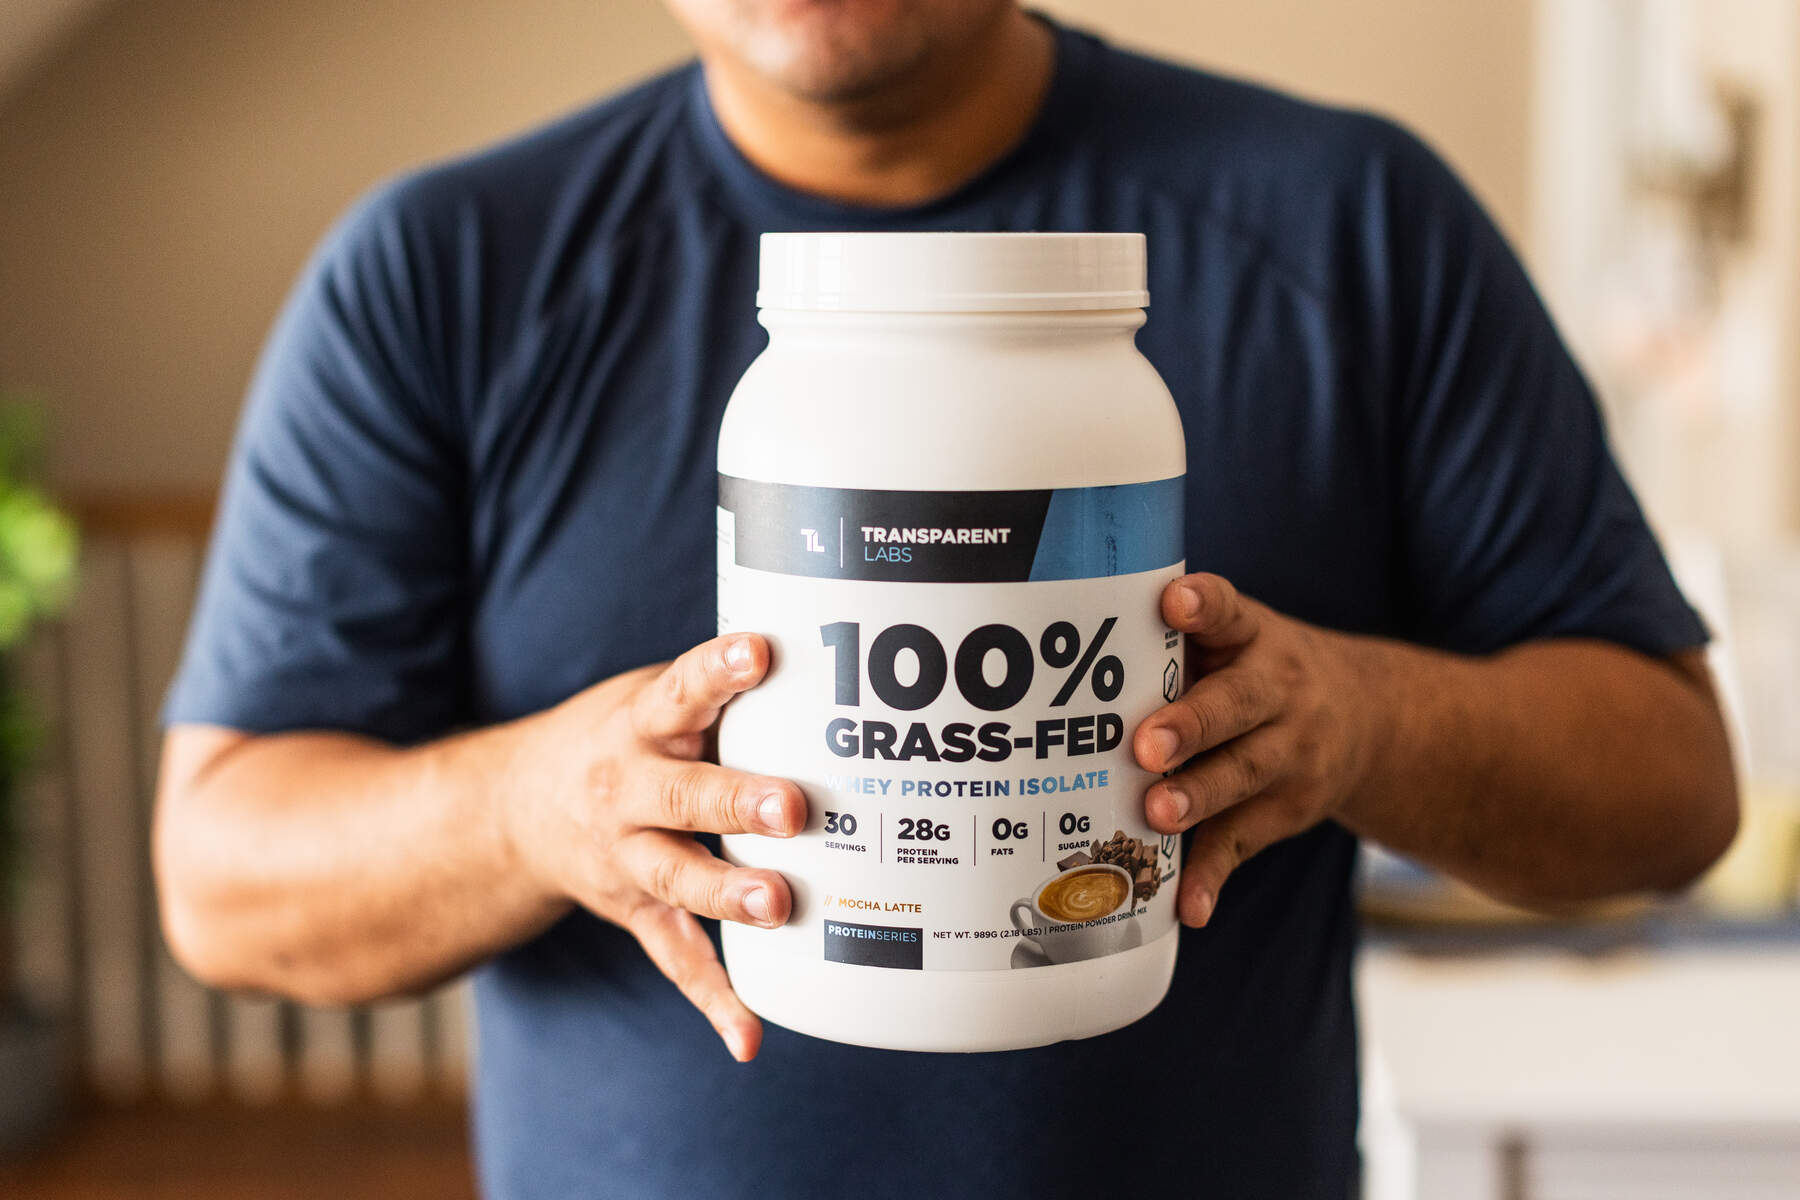 Man holding a bottle of Transparent Lab 100% Grass Fed Protein Isolate